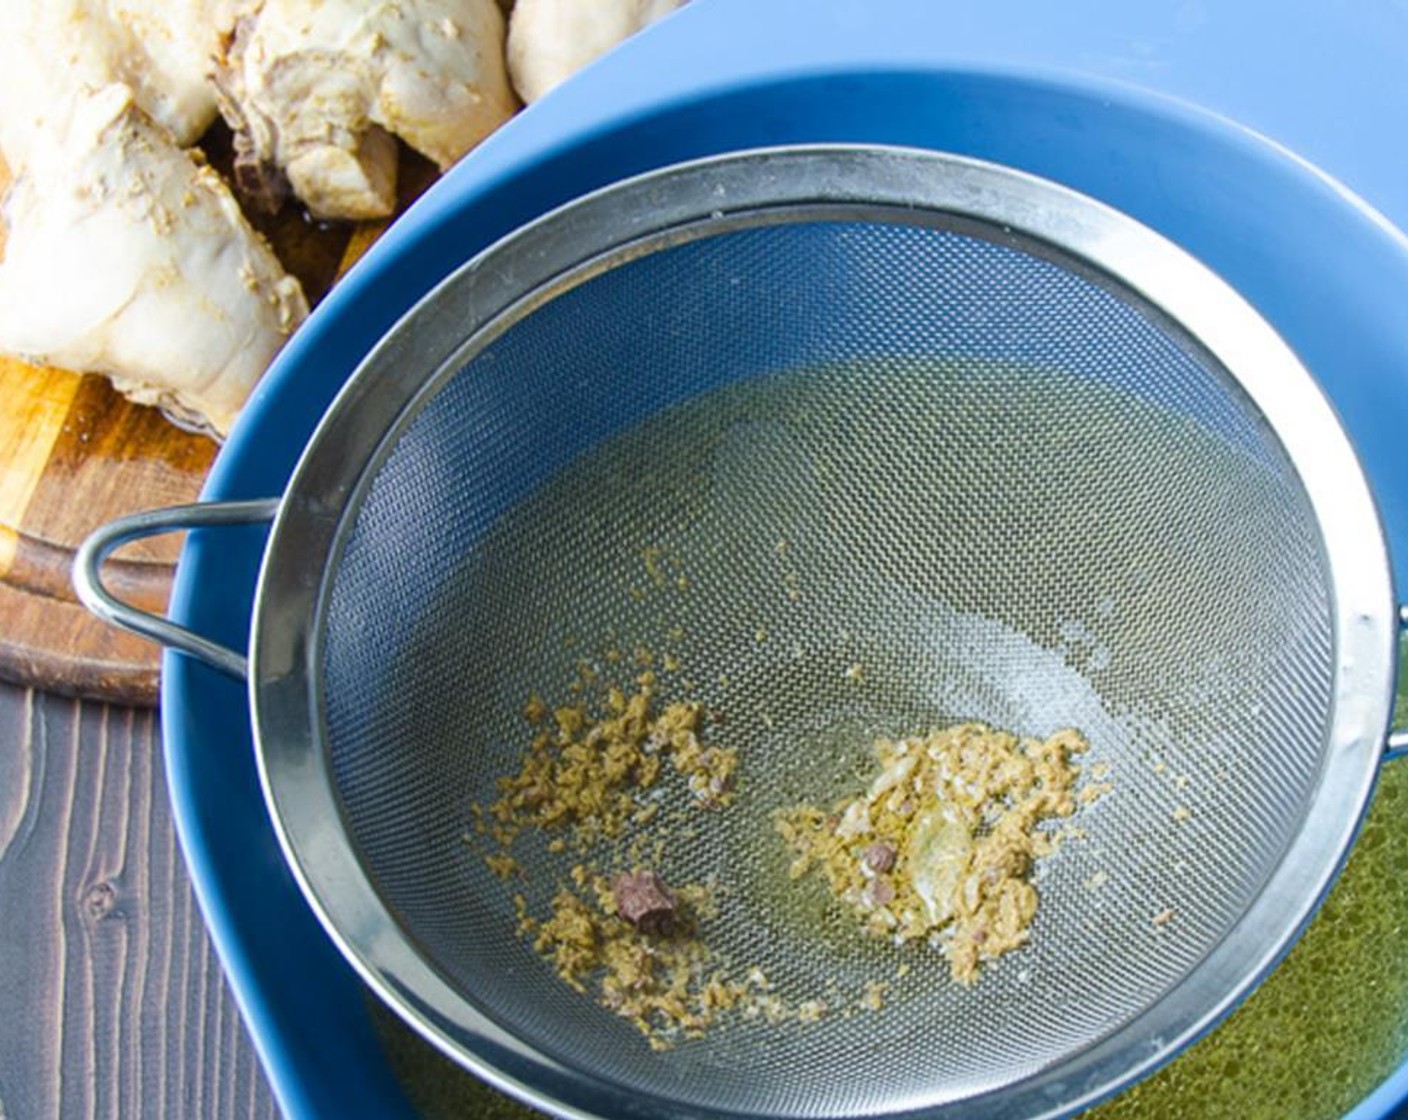 step 6 Set a fine mesh sieve over a large bowl and pour the broth through the sieve to remove the bouquet garni and any gray matter or other scum. Discard.